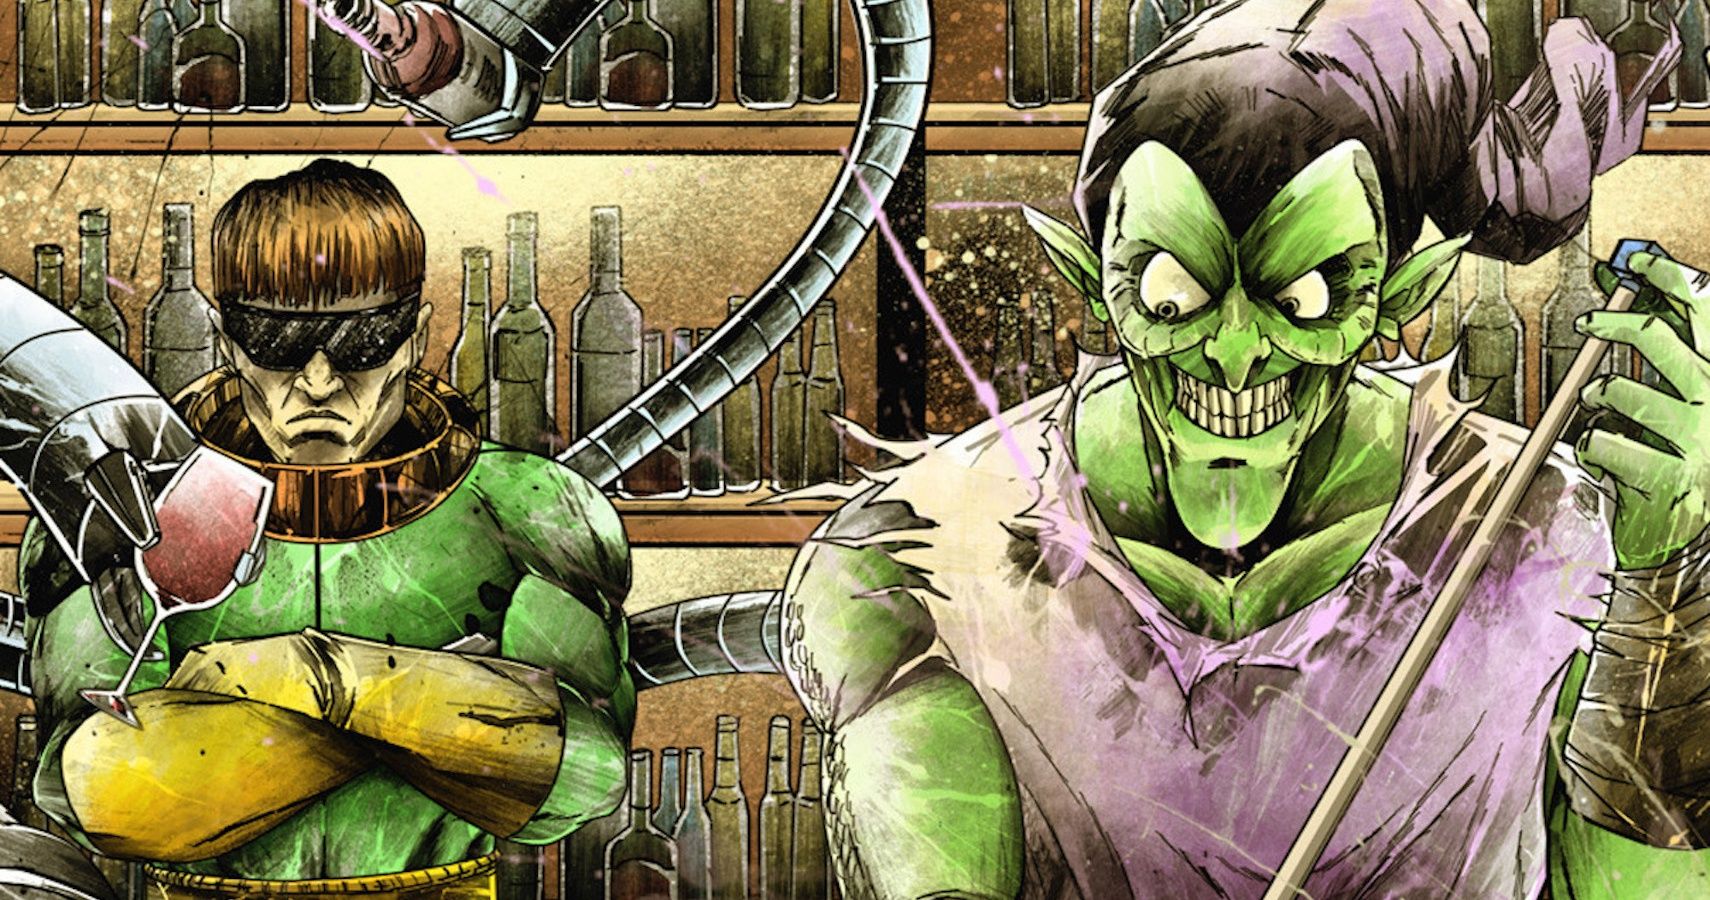 Doctor Octopus and Green Goblin in Spider-Man comics